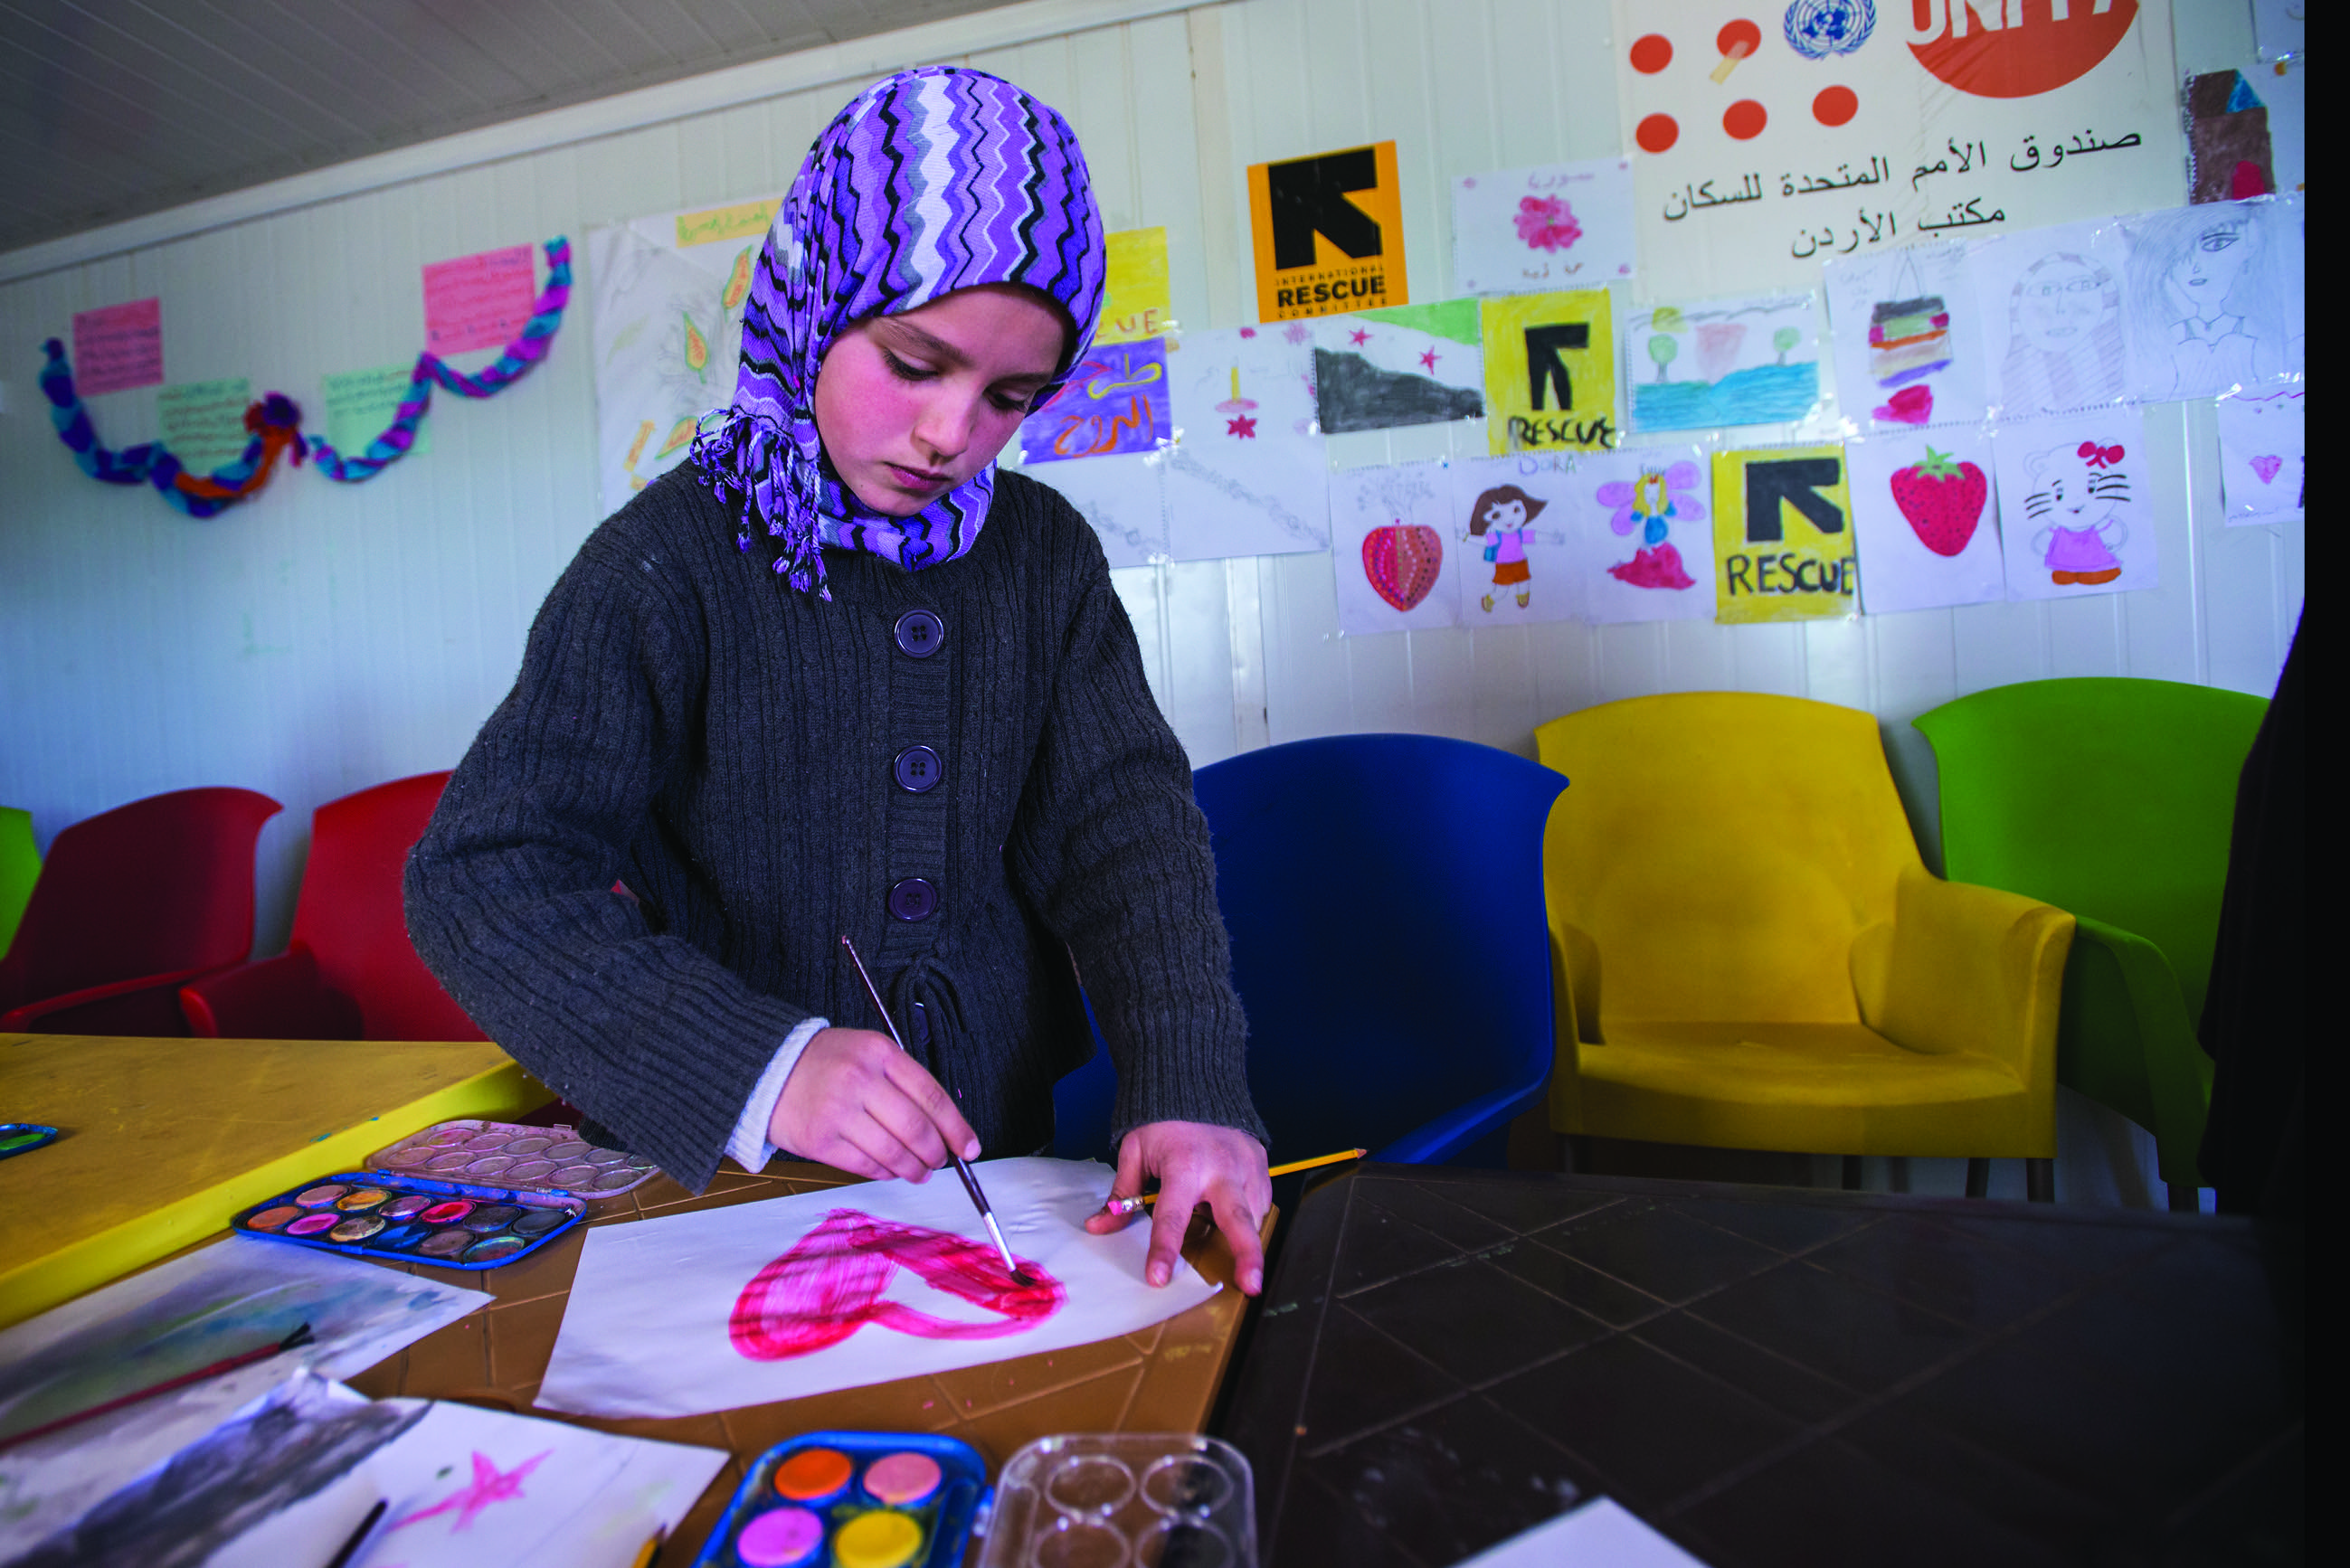 A Syrian refugee girl paints at a children’s play area at an IRC women’s center at Zaatari camp.